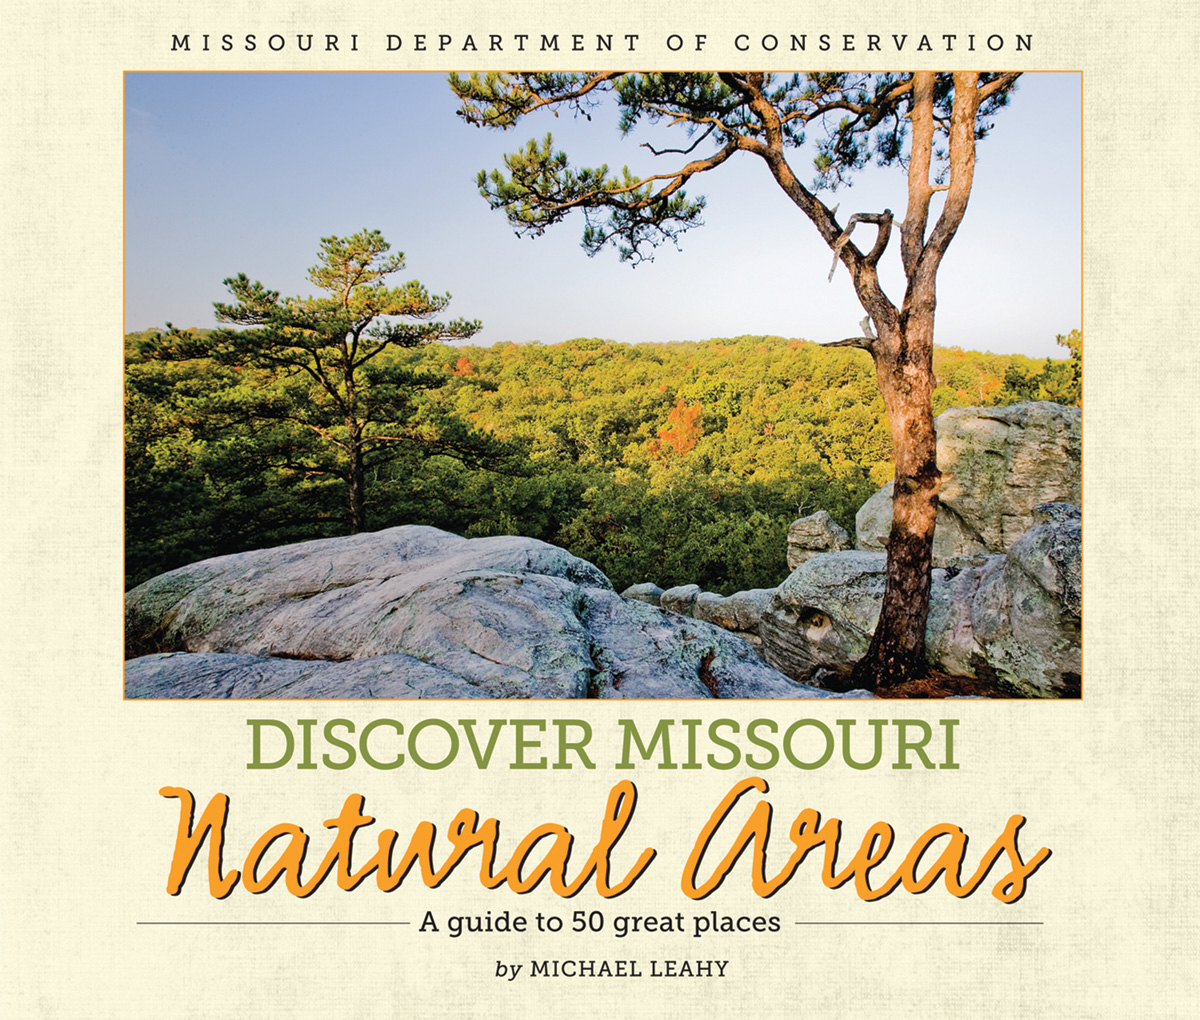 Natural Areas Guide cover